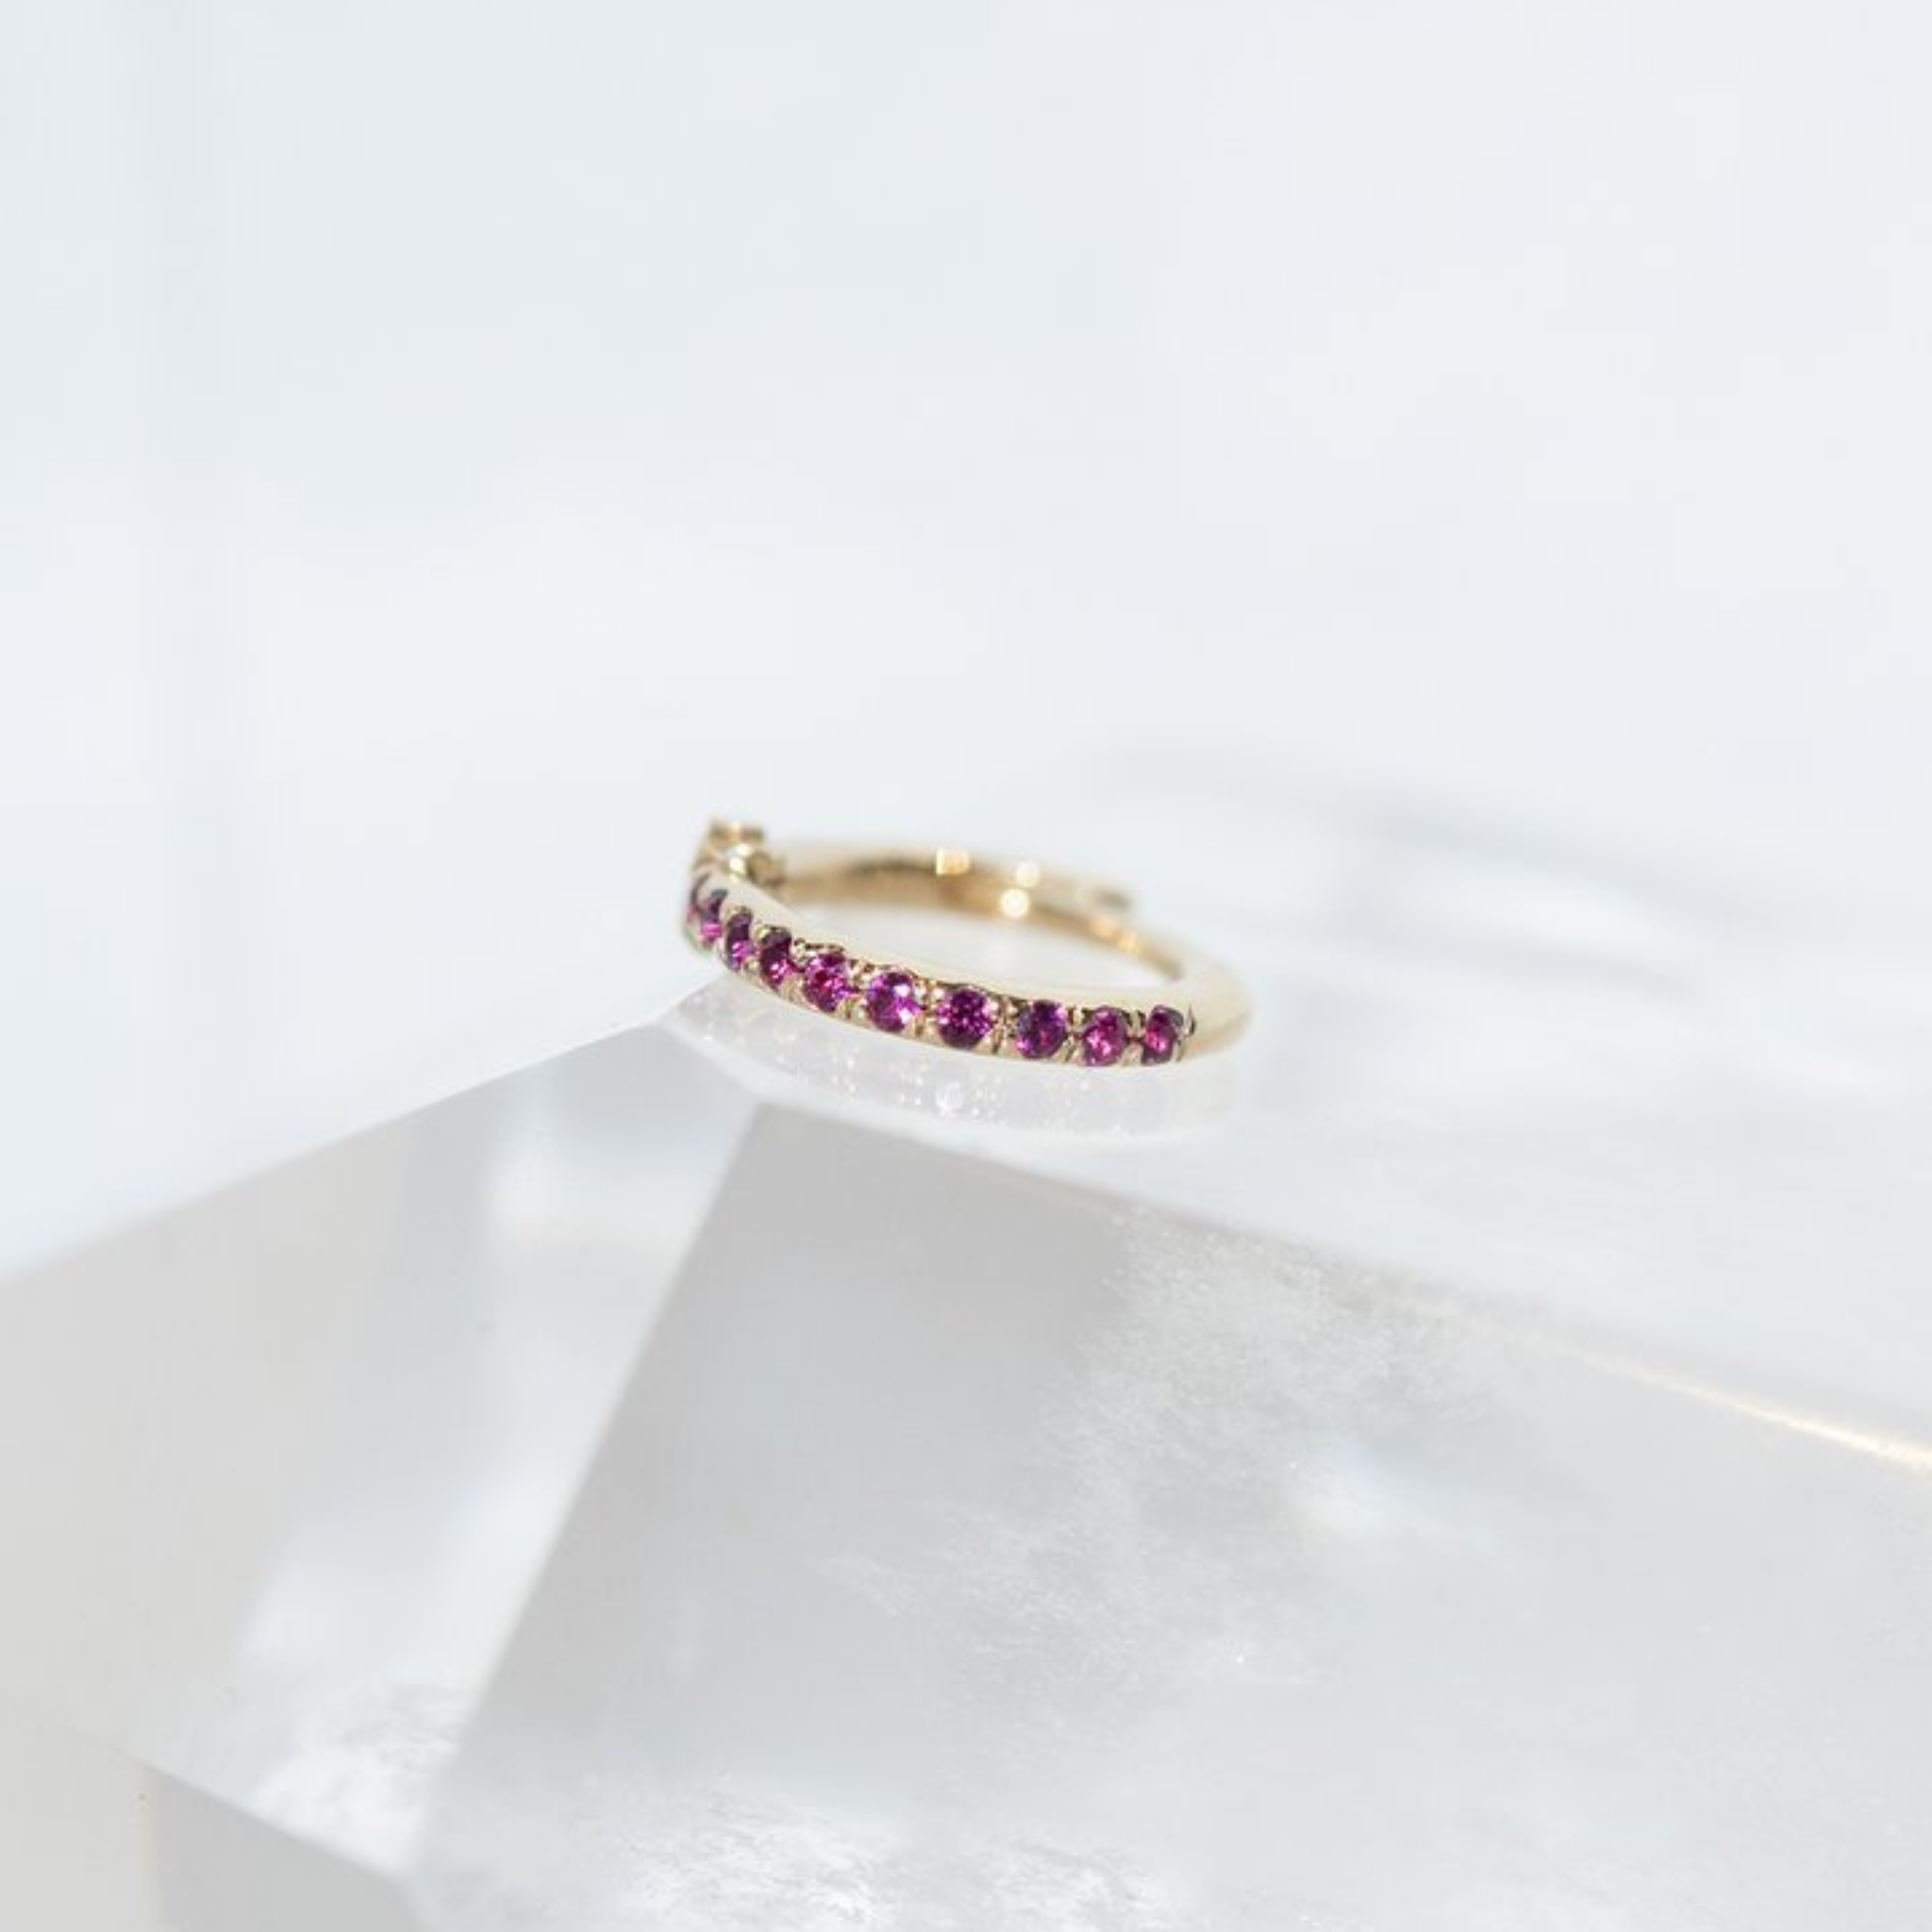 Micro Pave Colour Stone 10mm Hoop Earring